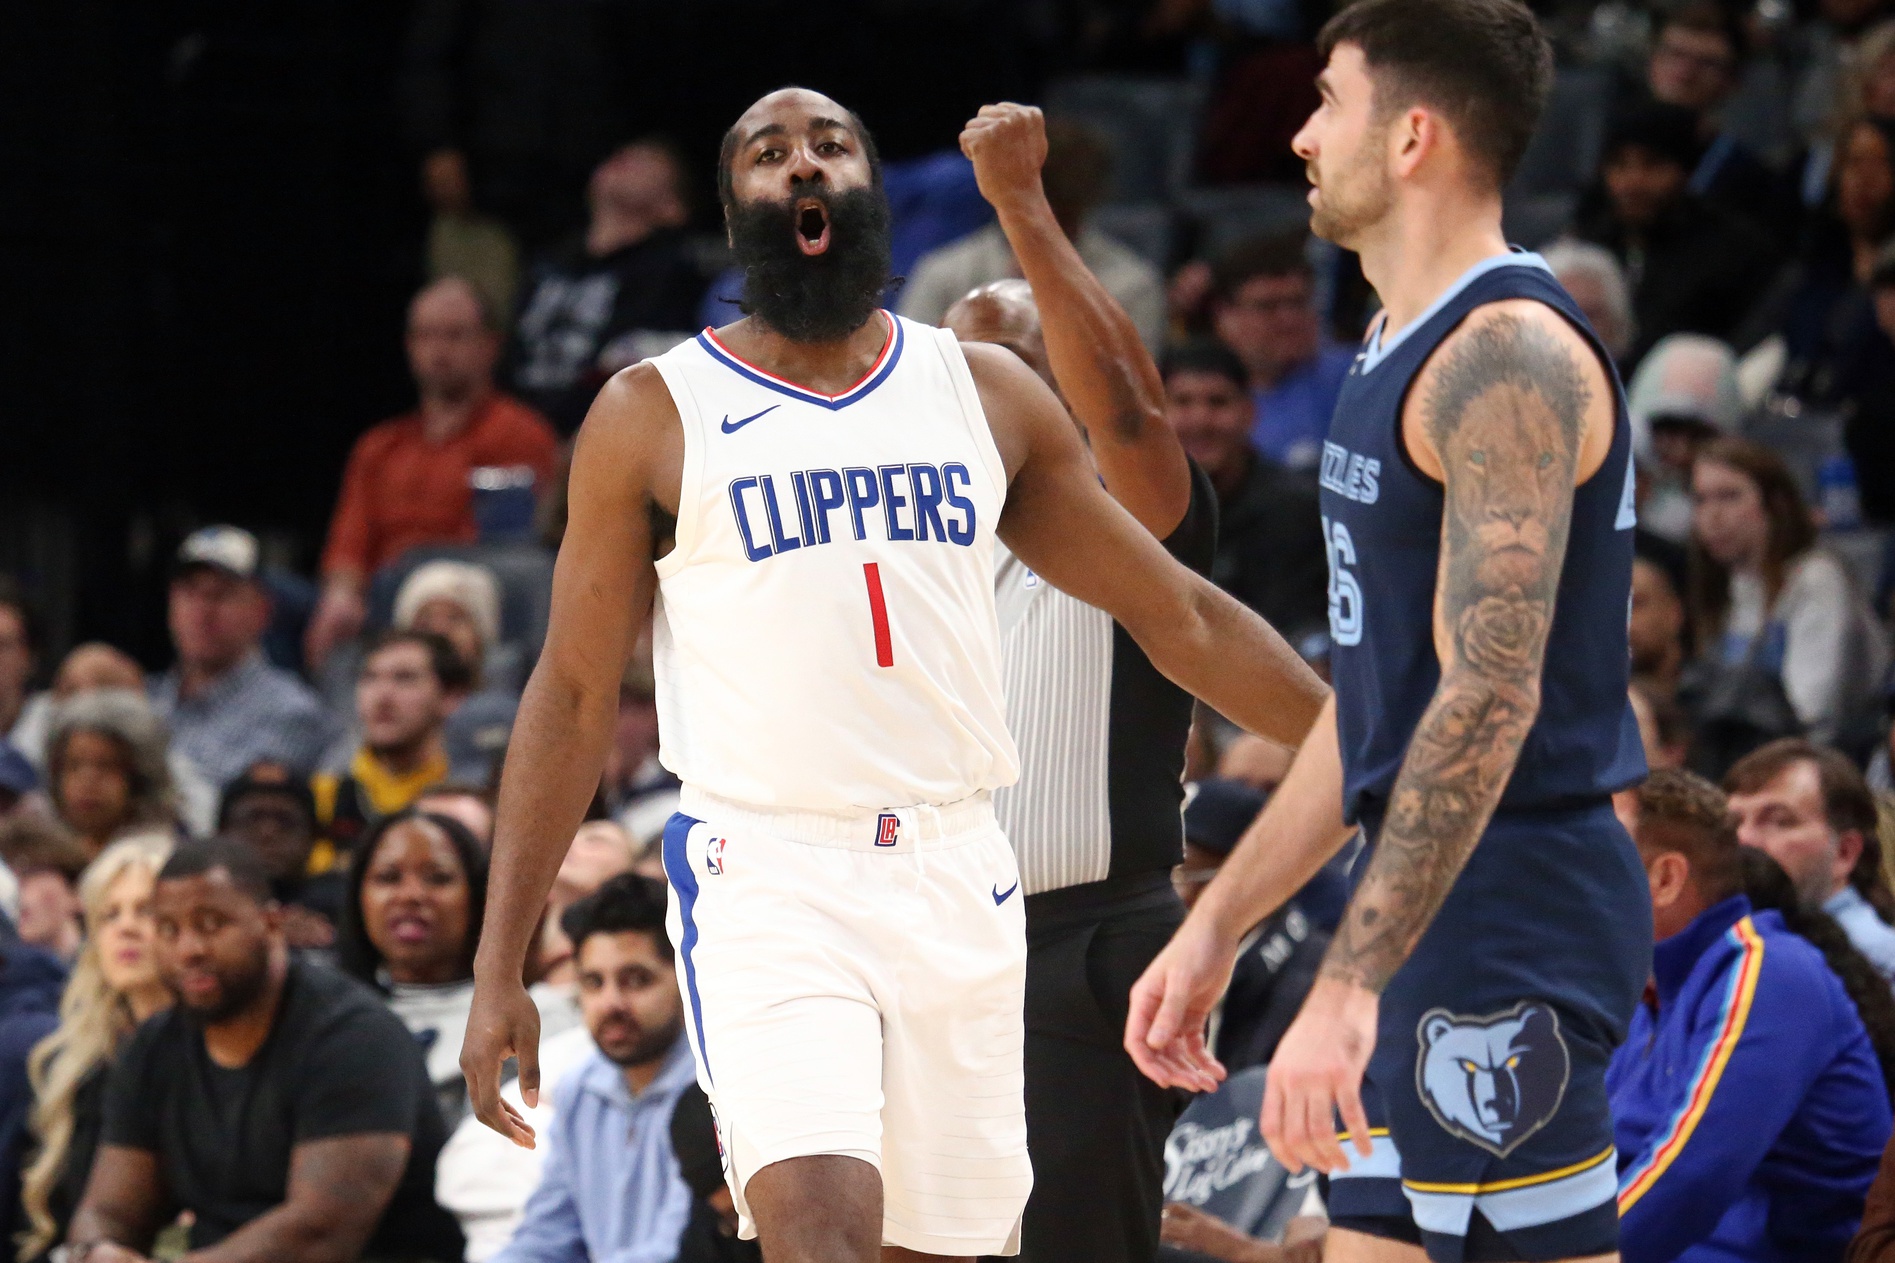 Los Angeles Clippers guard James Harden (1) reacts after a three point basket during the first half against the Memphis Grizzlies at FedExForum.